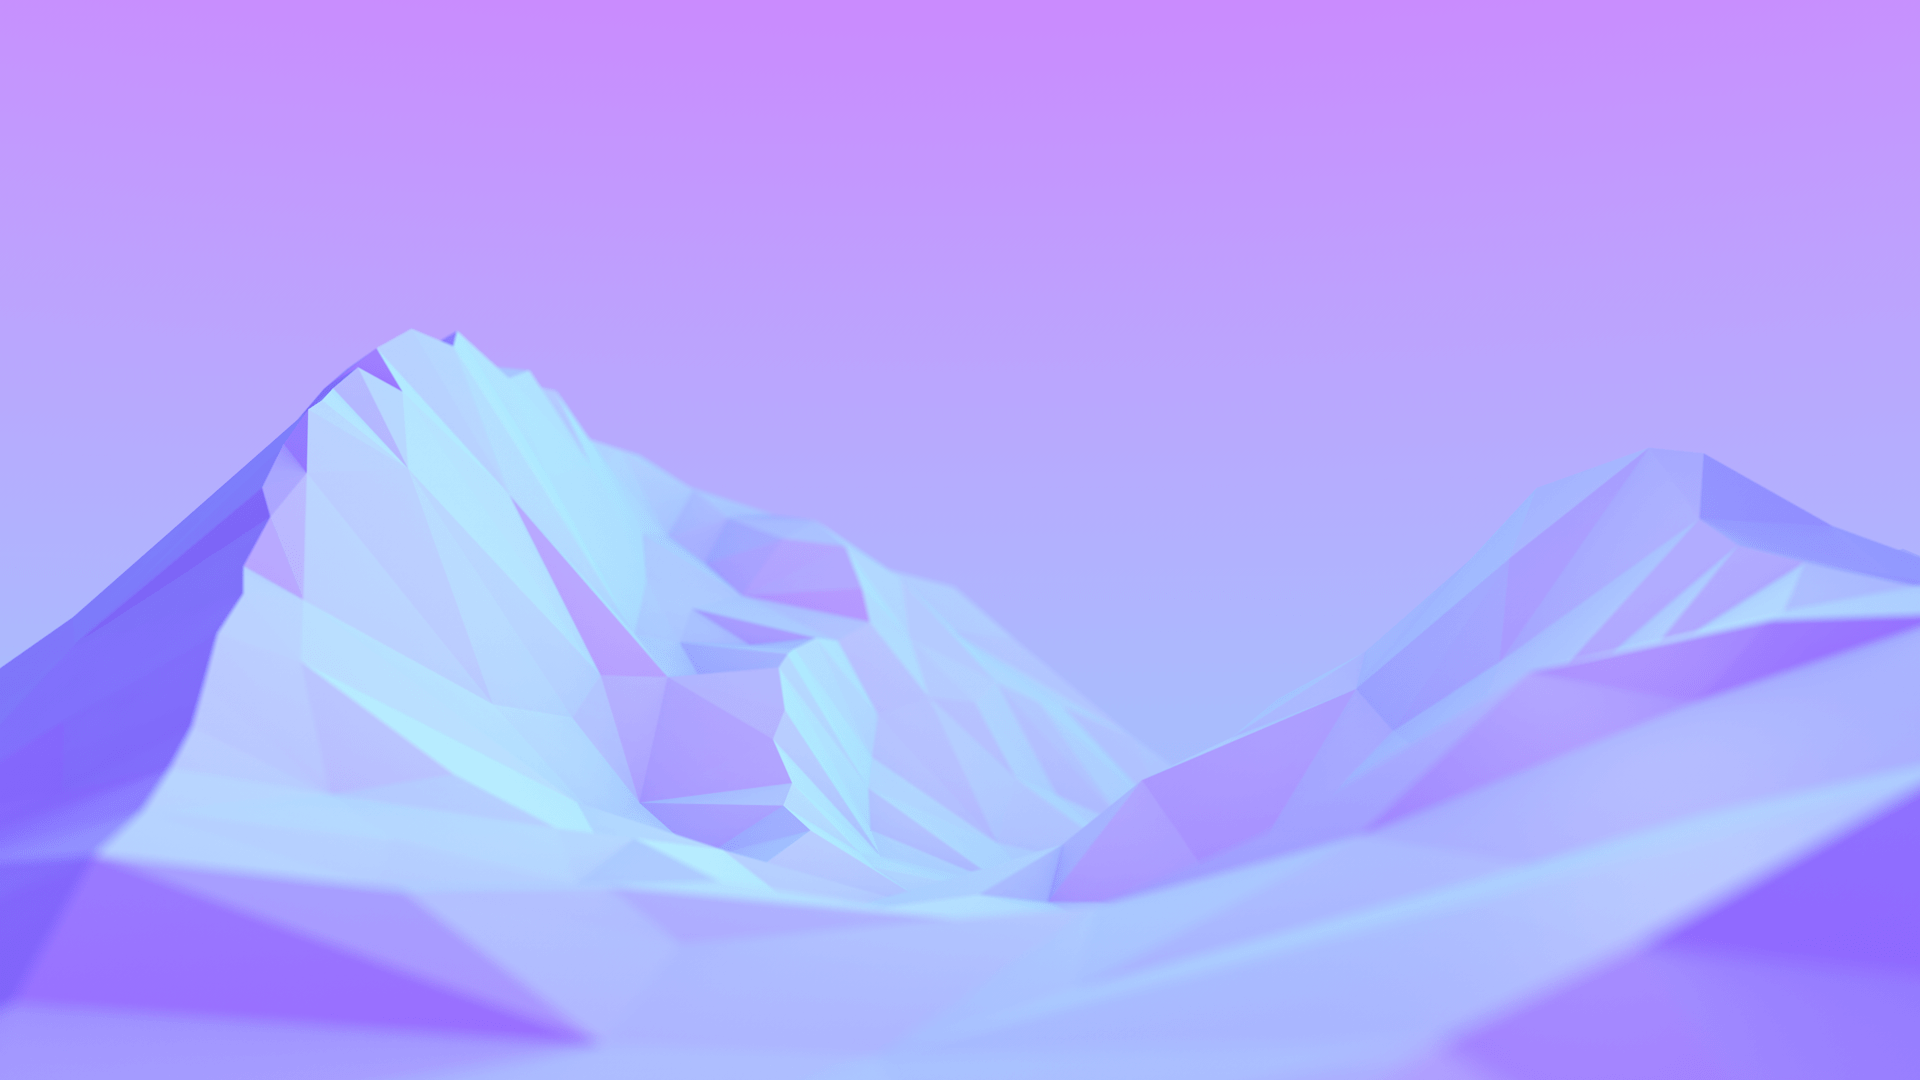 A purple abstract image of a mountain range - Low poly